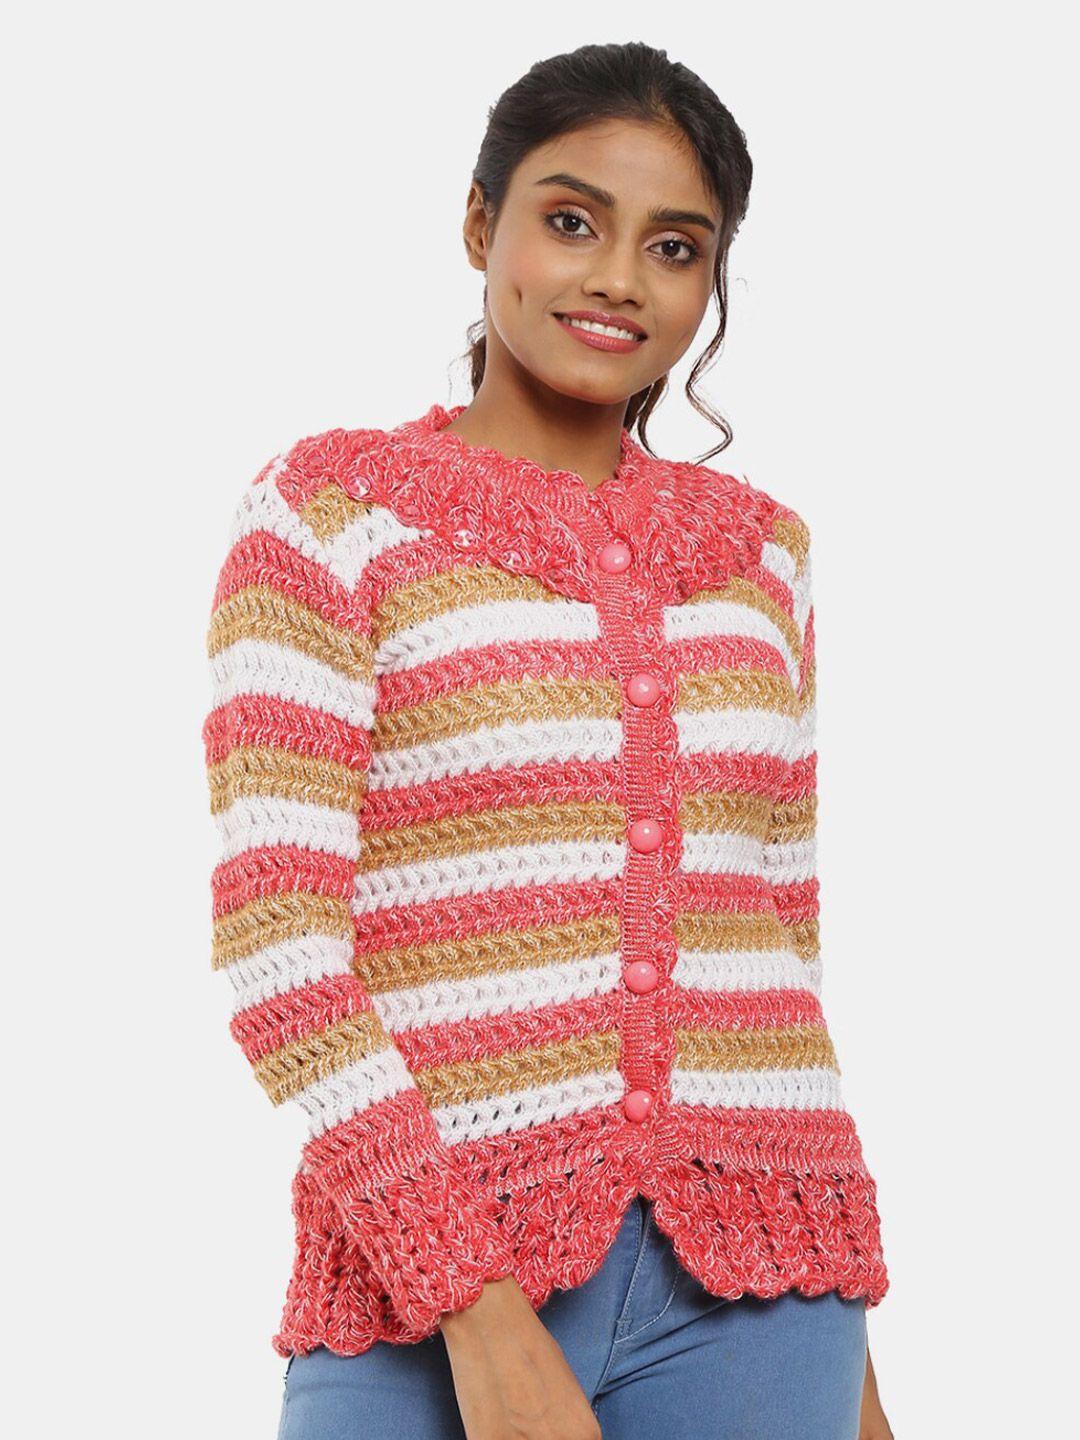 v-mart-cable-knit-acrylic-cardigan-sweater